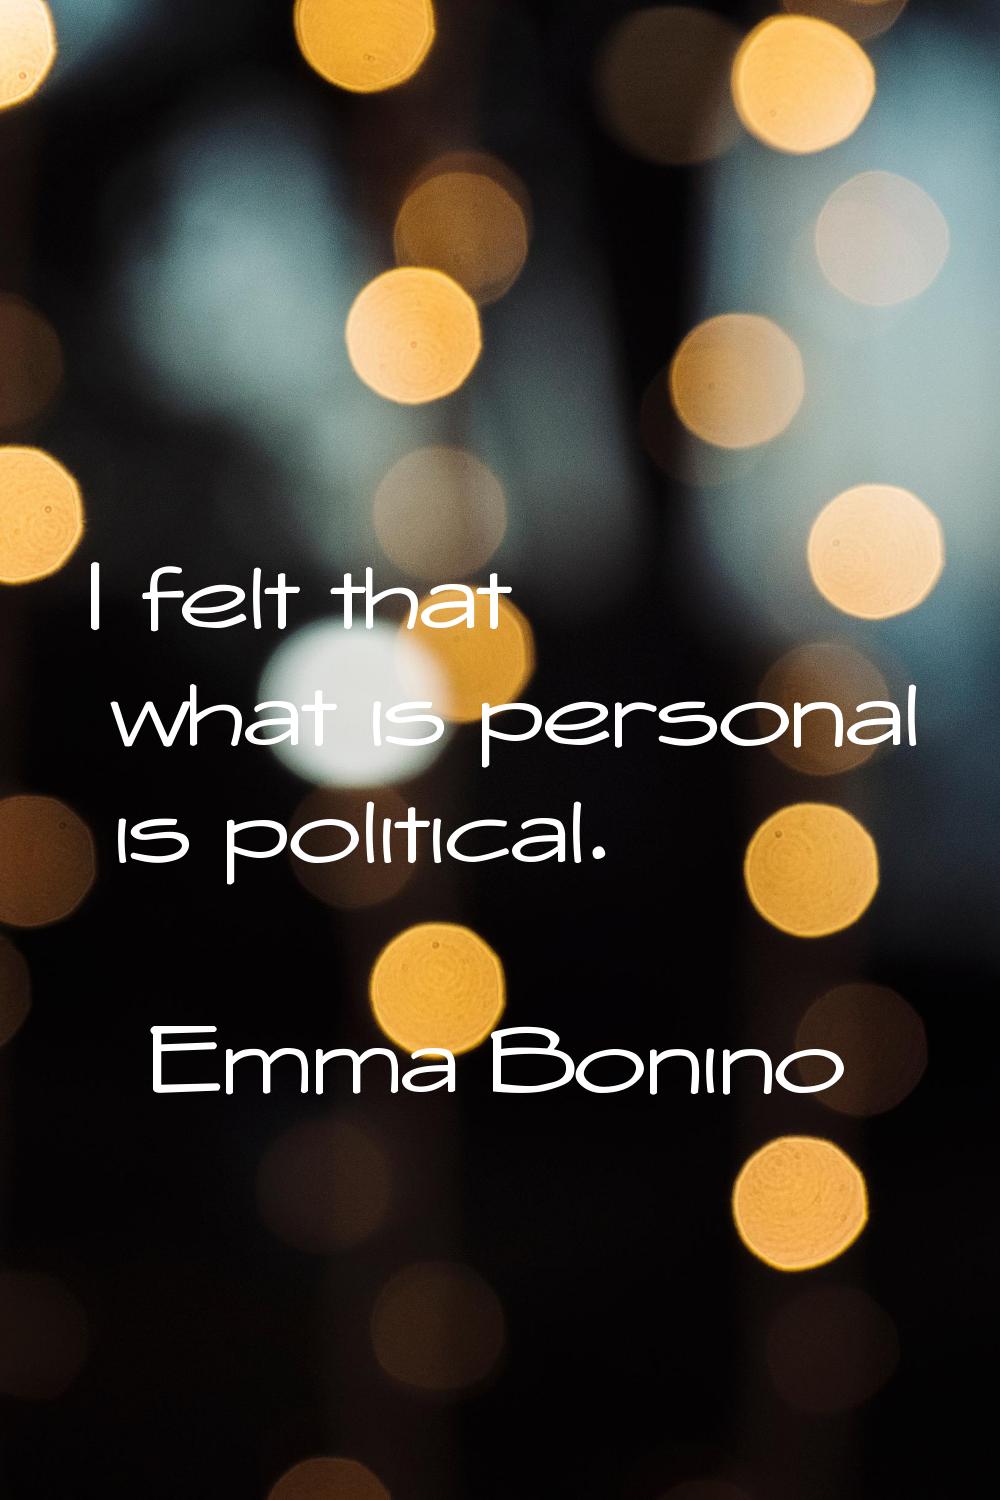 I felt that what is personal is political.